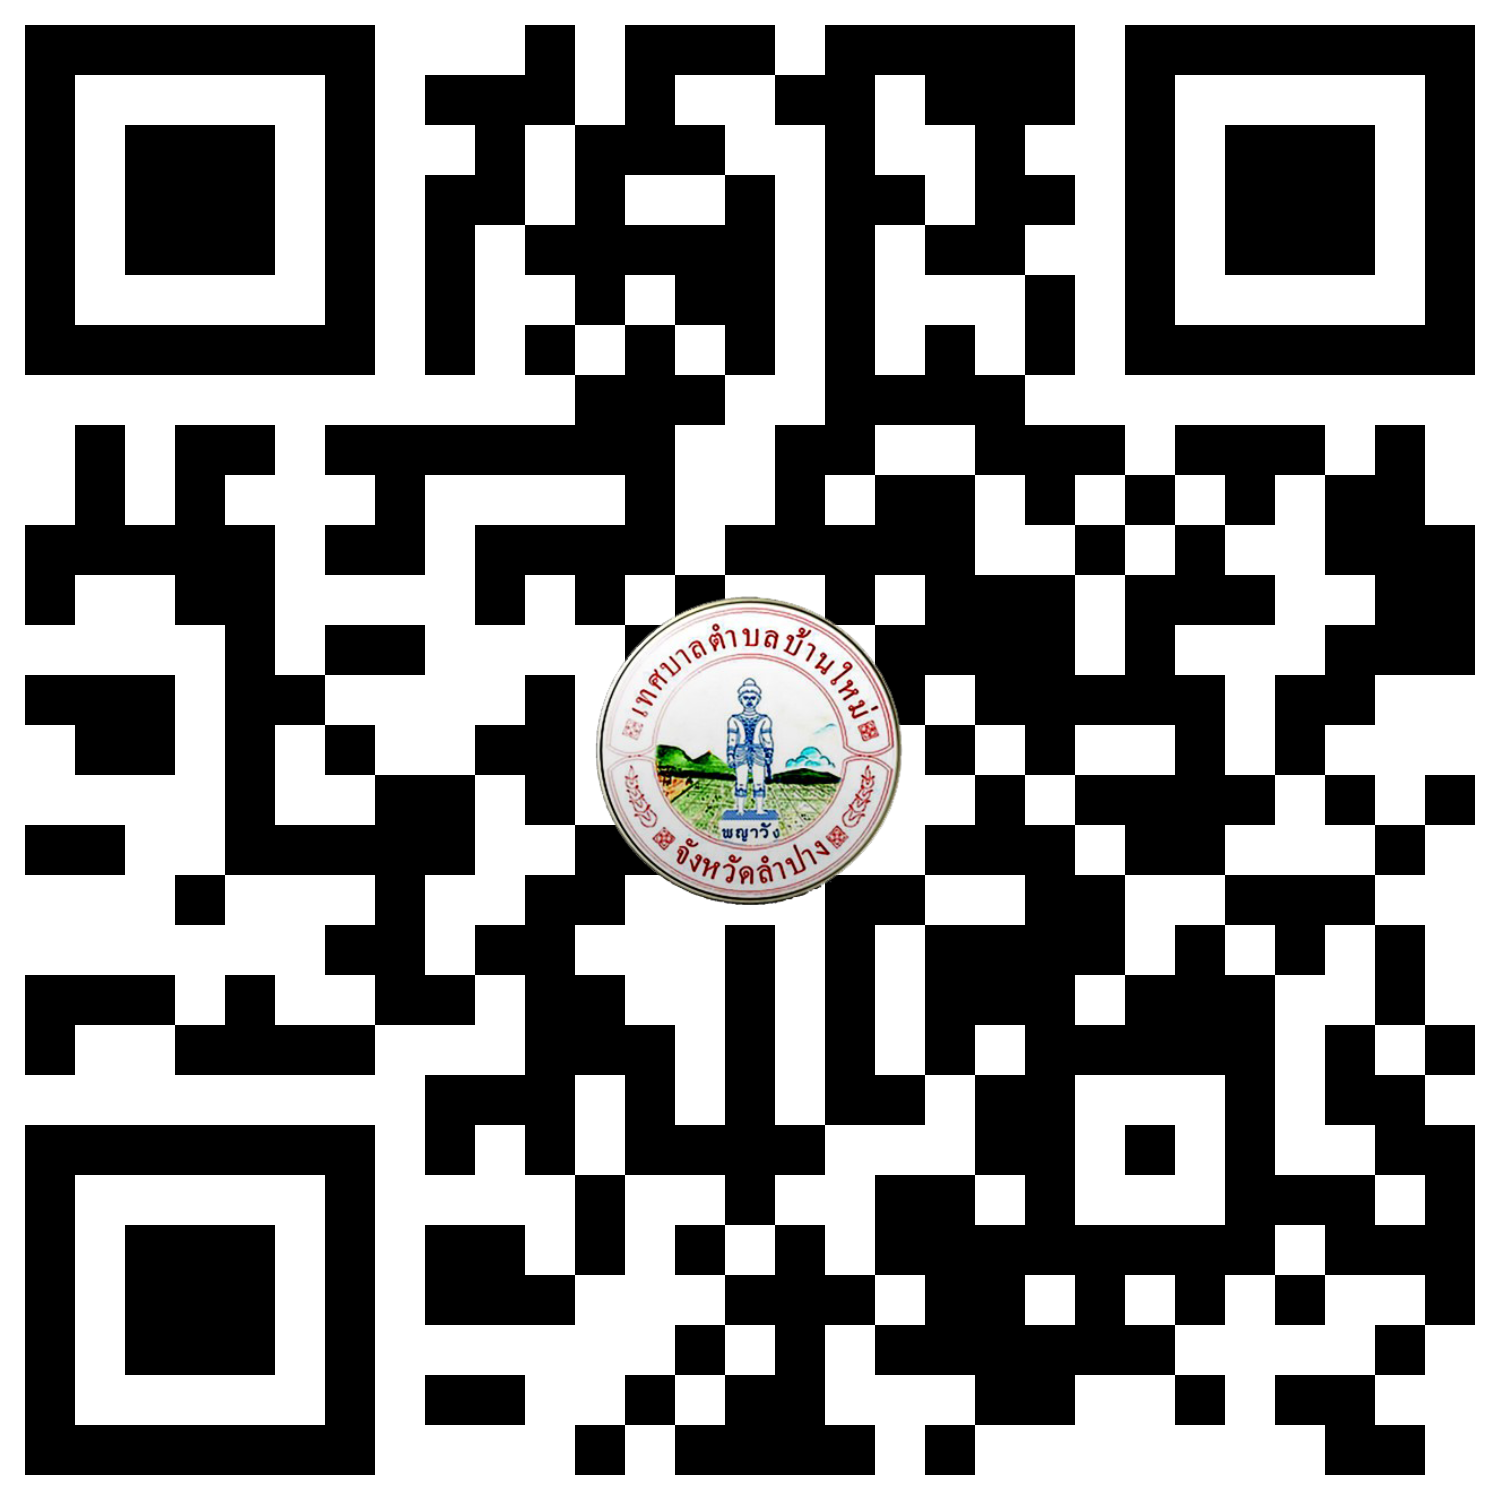 qrcode_8903074_.png